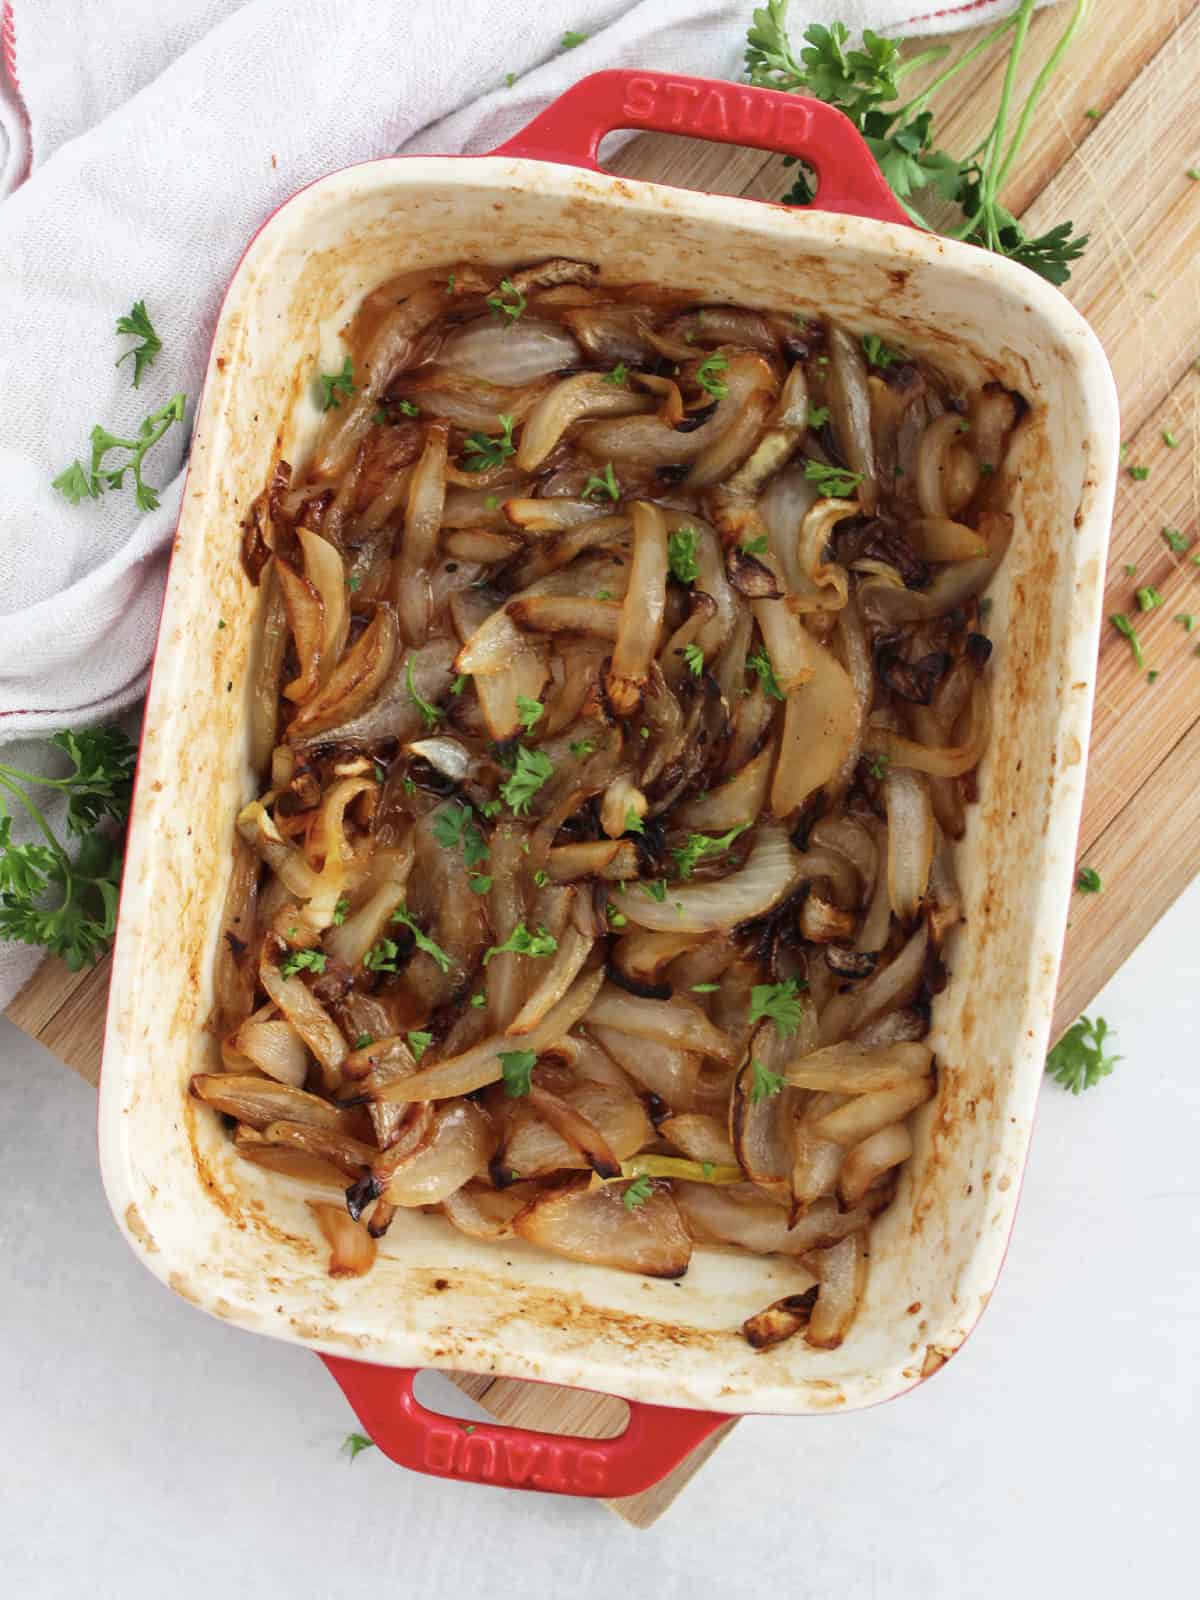 Caramelized onions in a red baking dish garnished with fresh parsley.